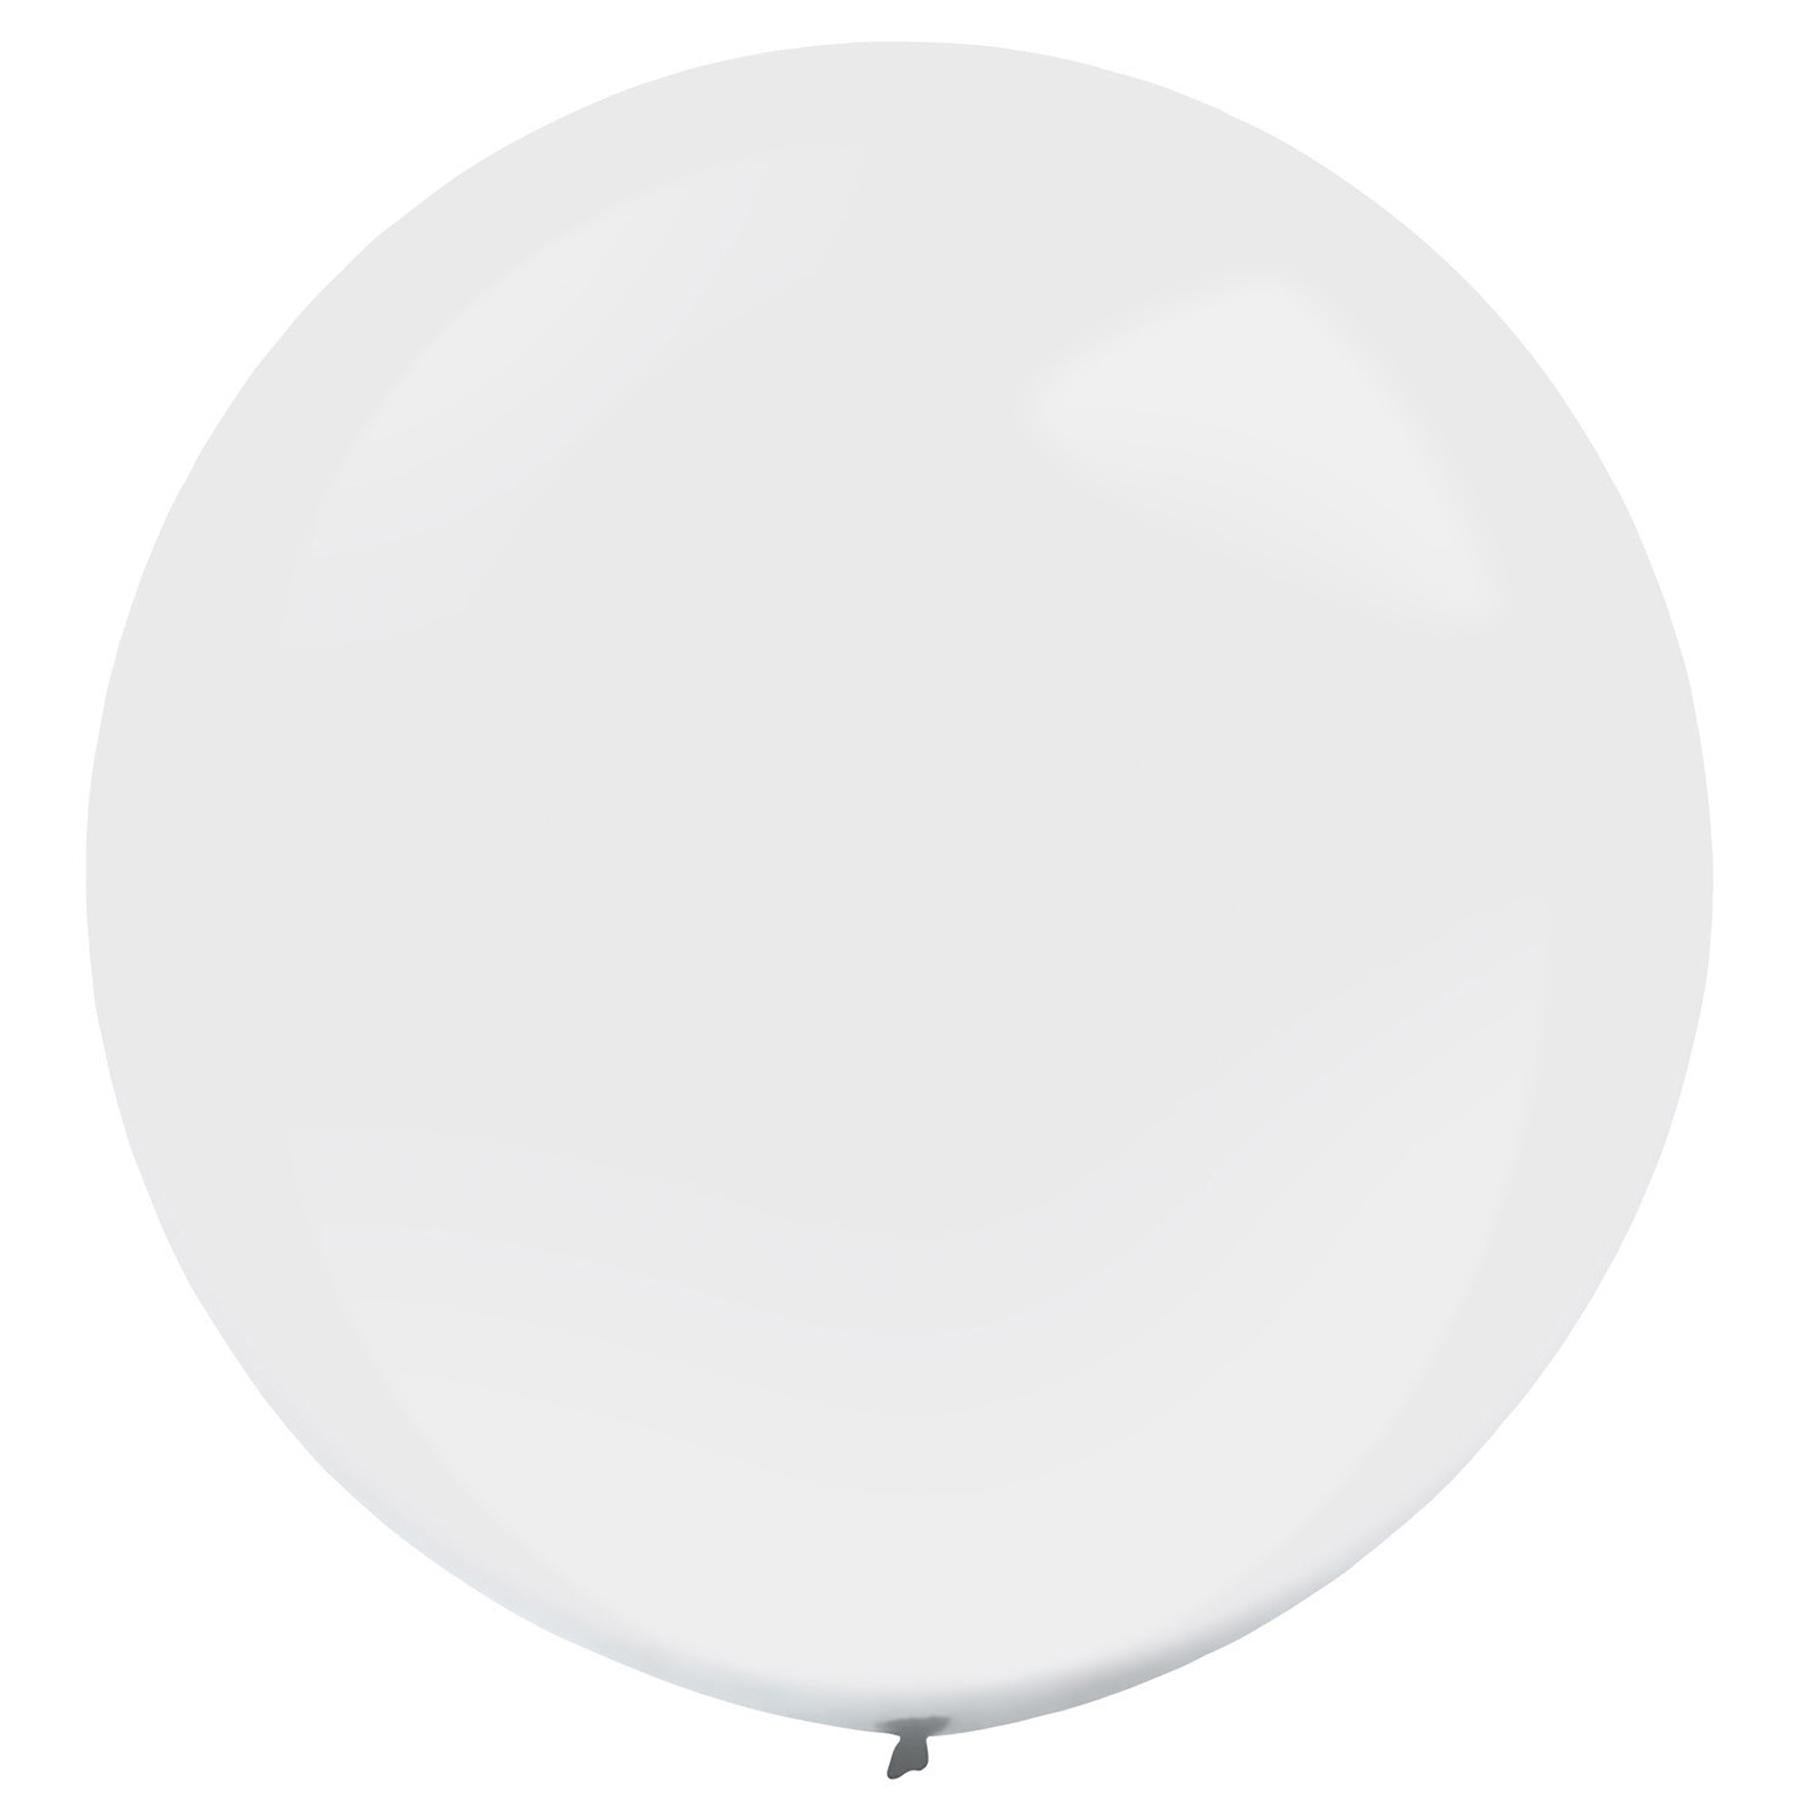 Frosty White Standard Latex Balloons 3ft Balloons & Streamers - Party Centre